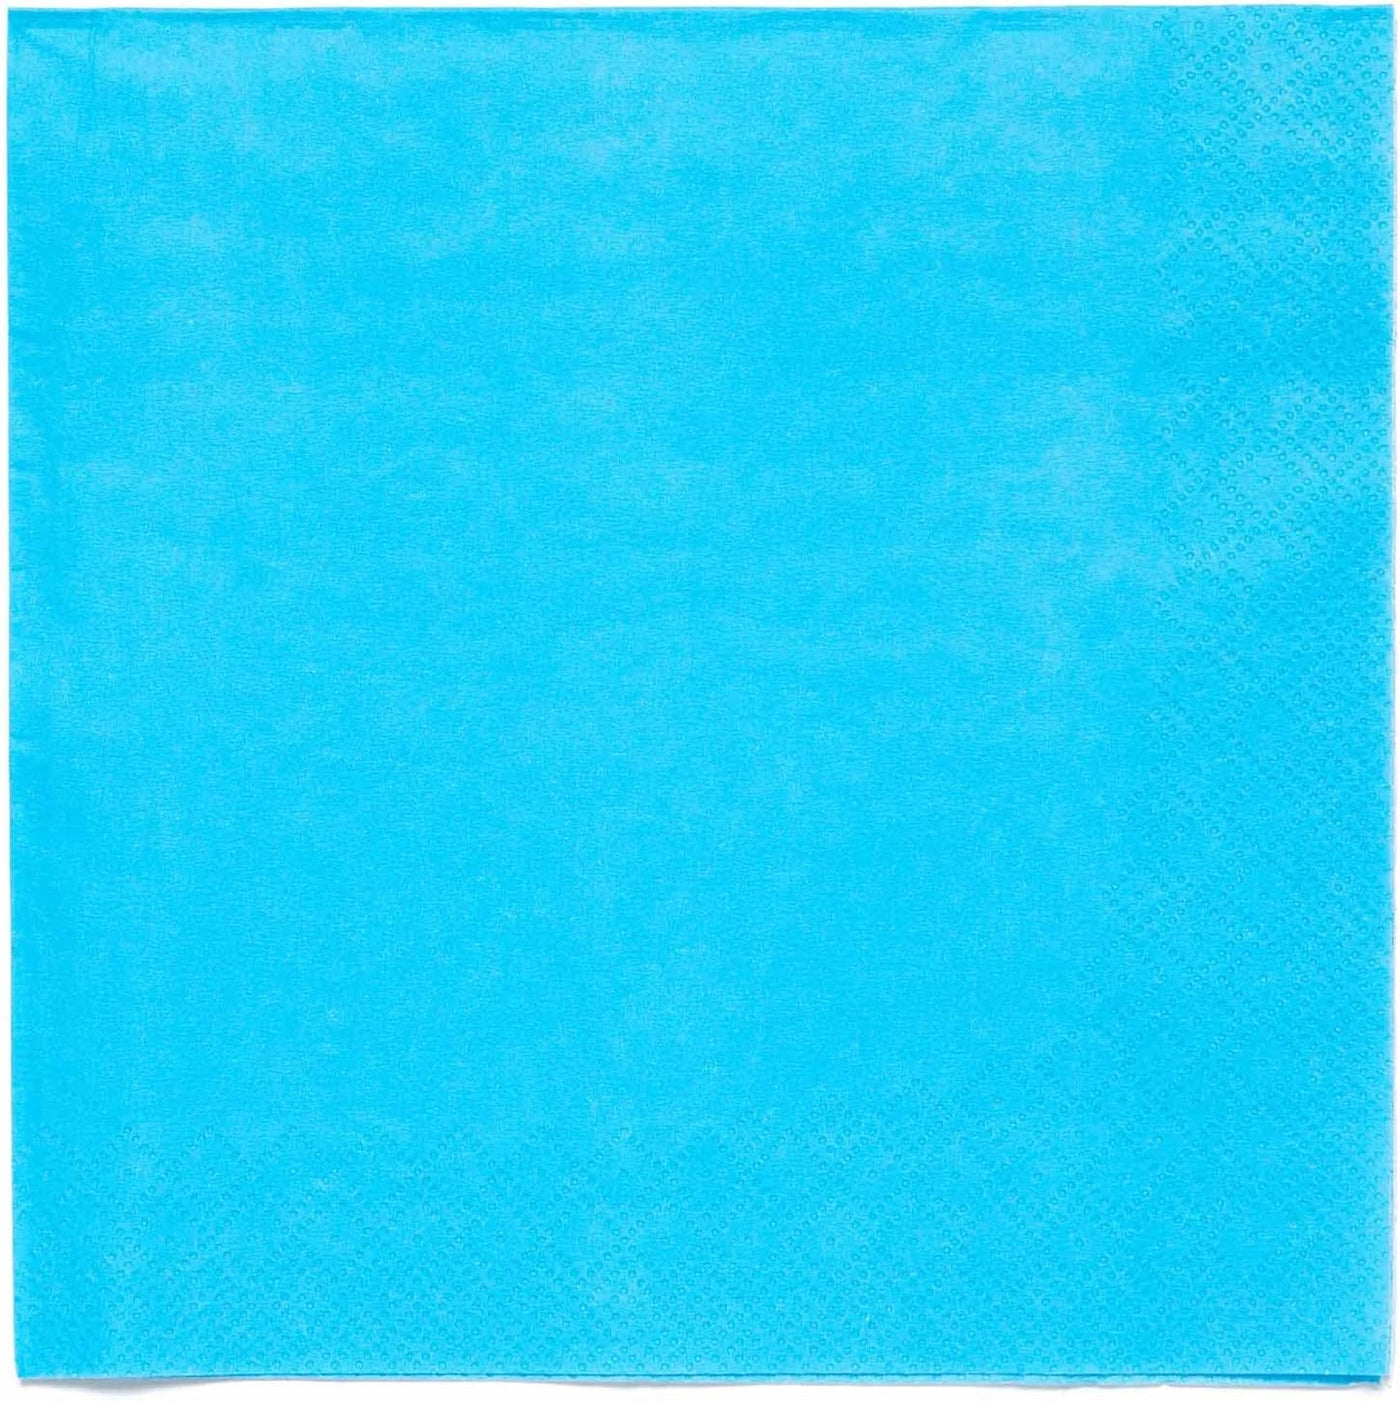 Pack of 20 Turquoise Paper Napkins - 2Ply - Partyshakes Party Supplies